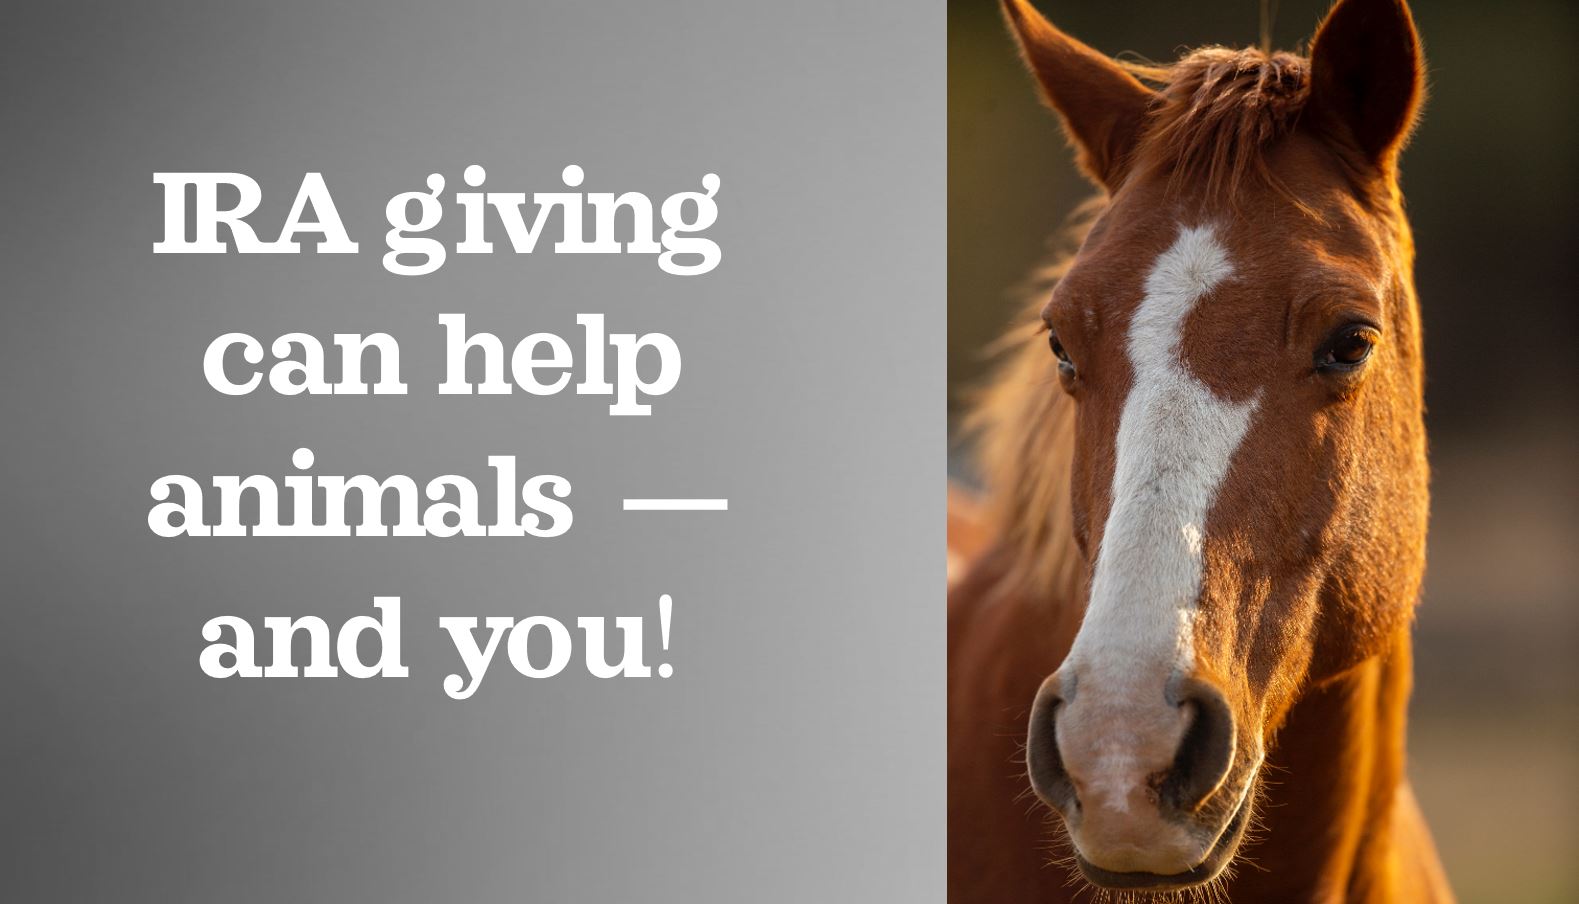  IRA giving can help animals and you! 